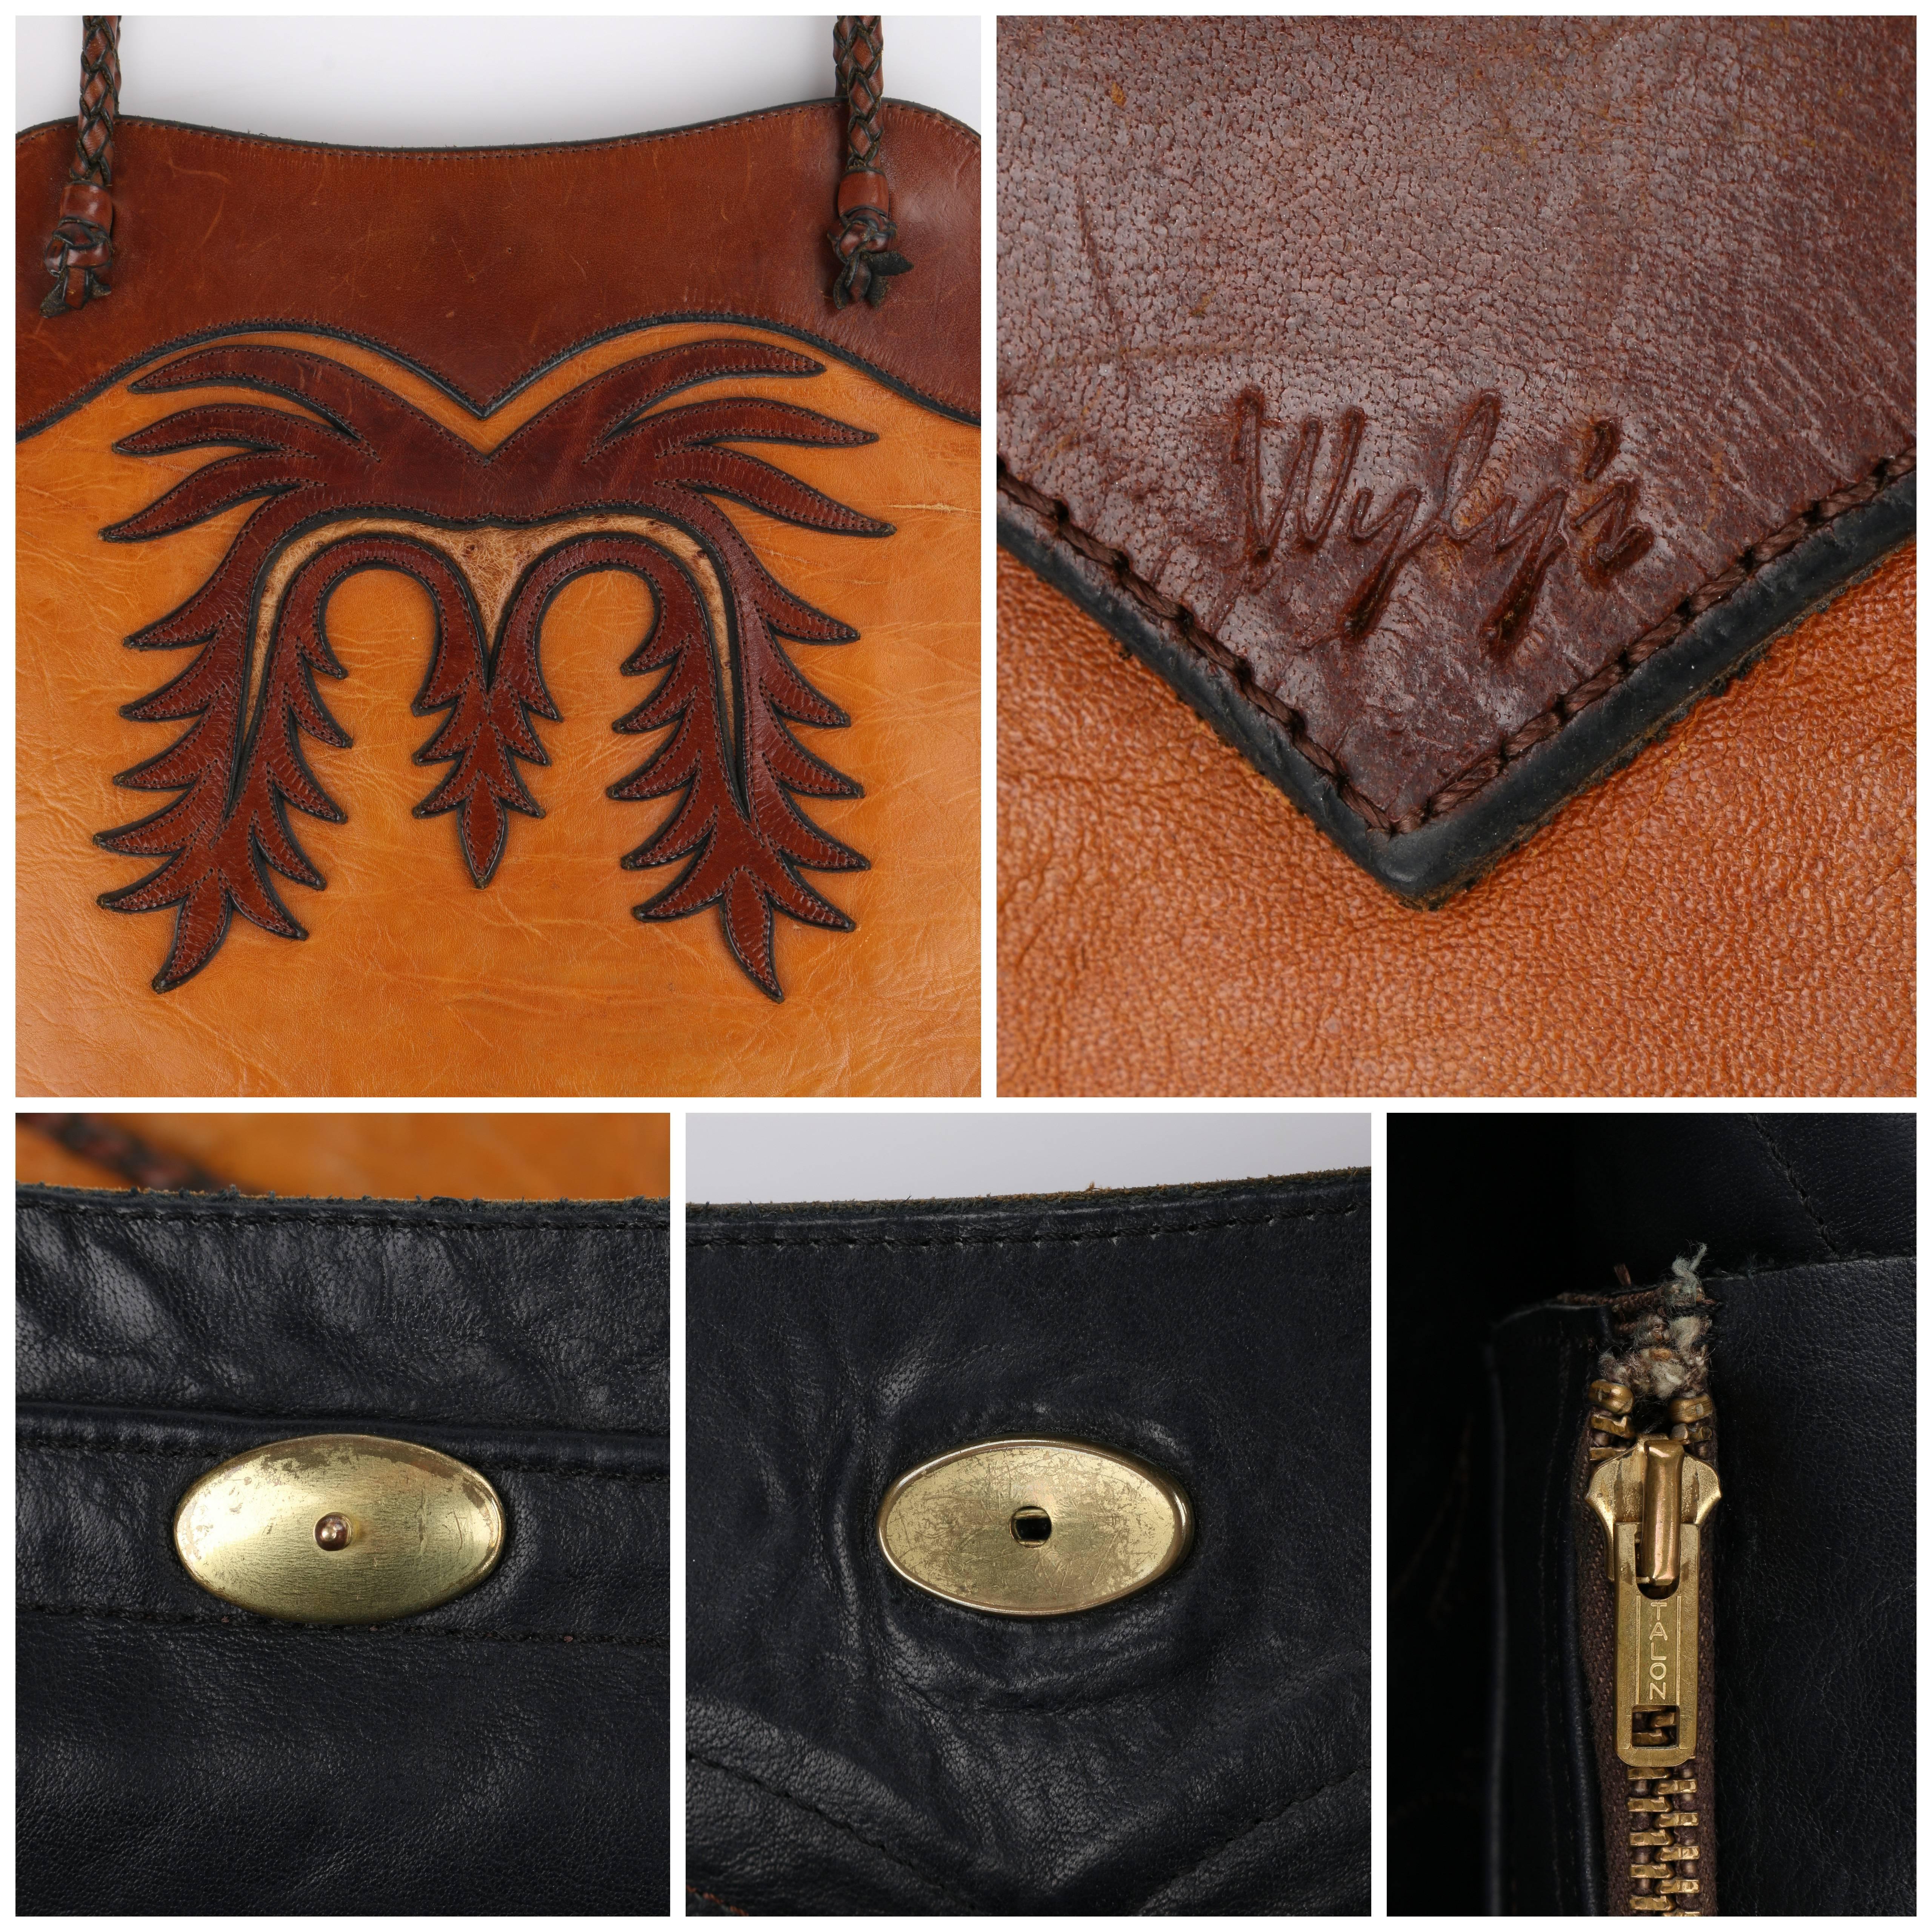 Women's WYLY'S c.1970's Leather & Ostrich Handcrafted Southwestern Shoulder Bag Purse